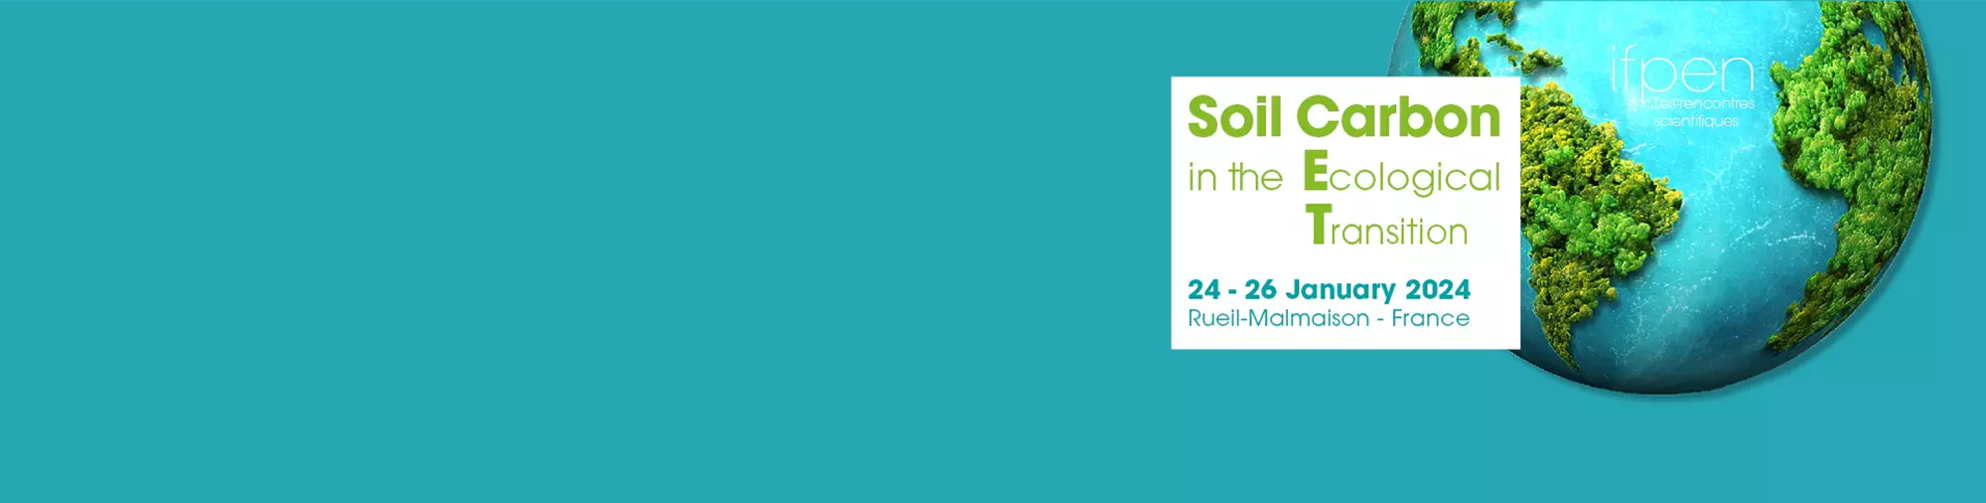 Symposium "Soil Carbon in the Ecological Transition" (SoilCET)